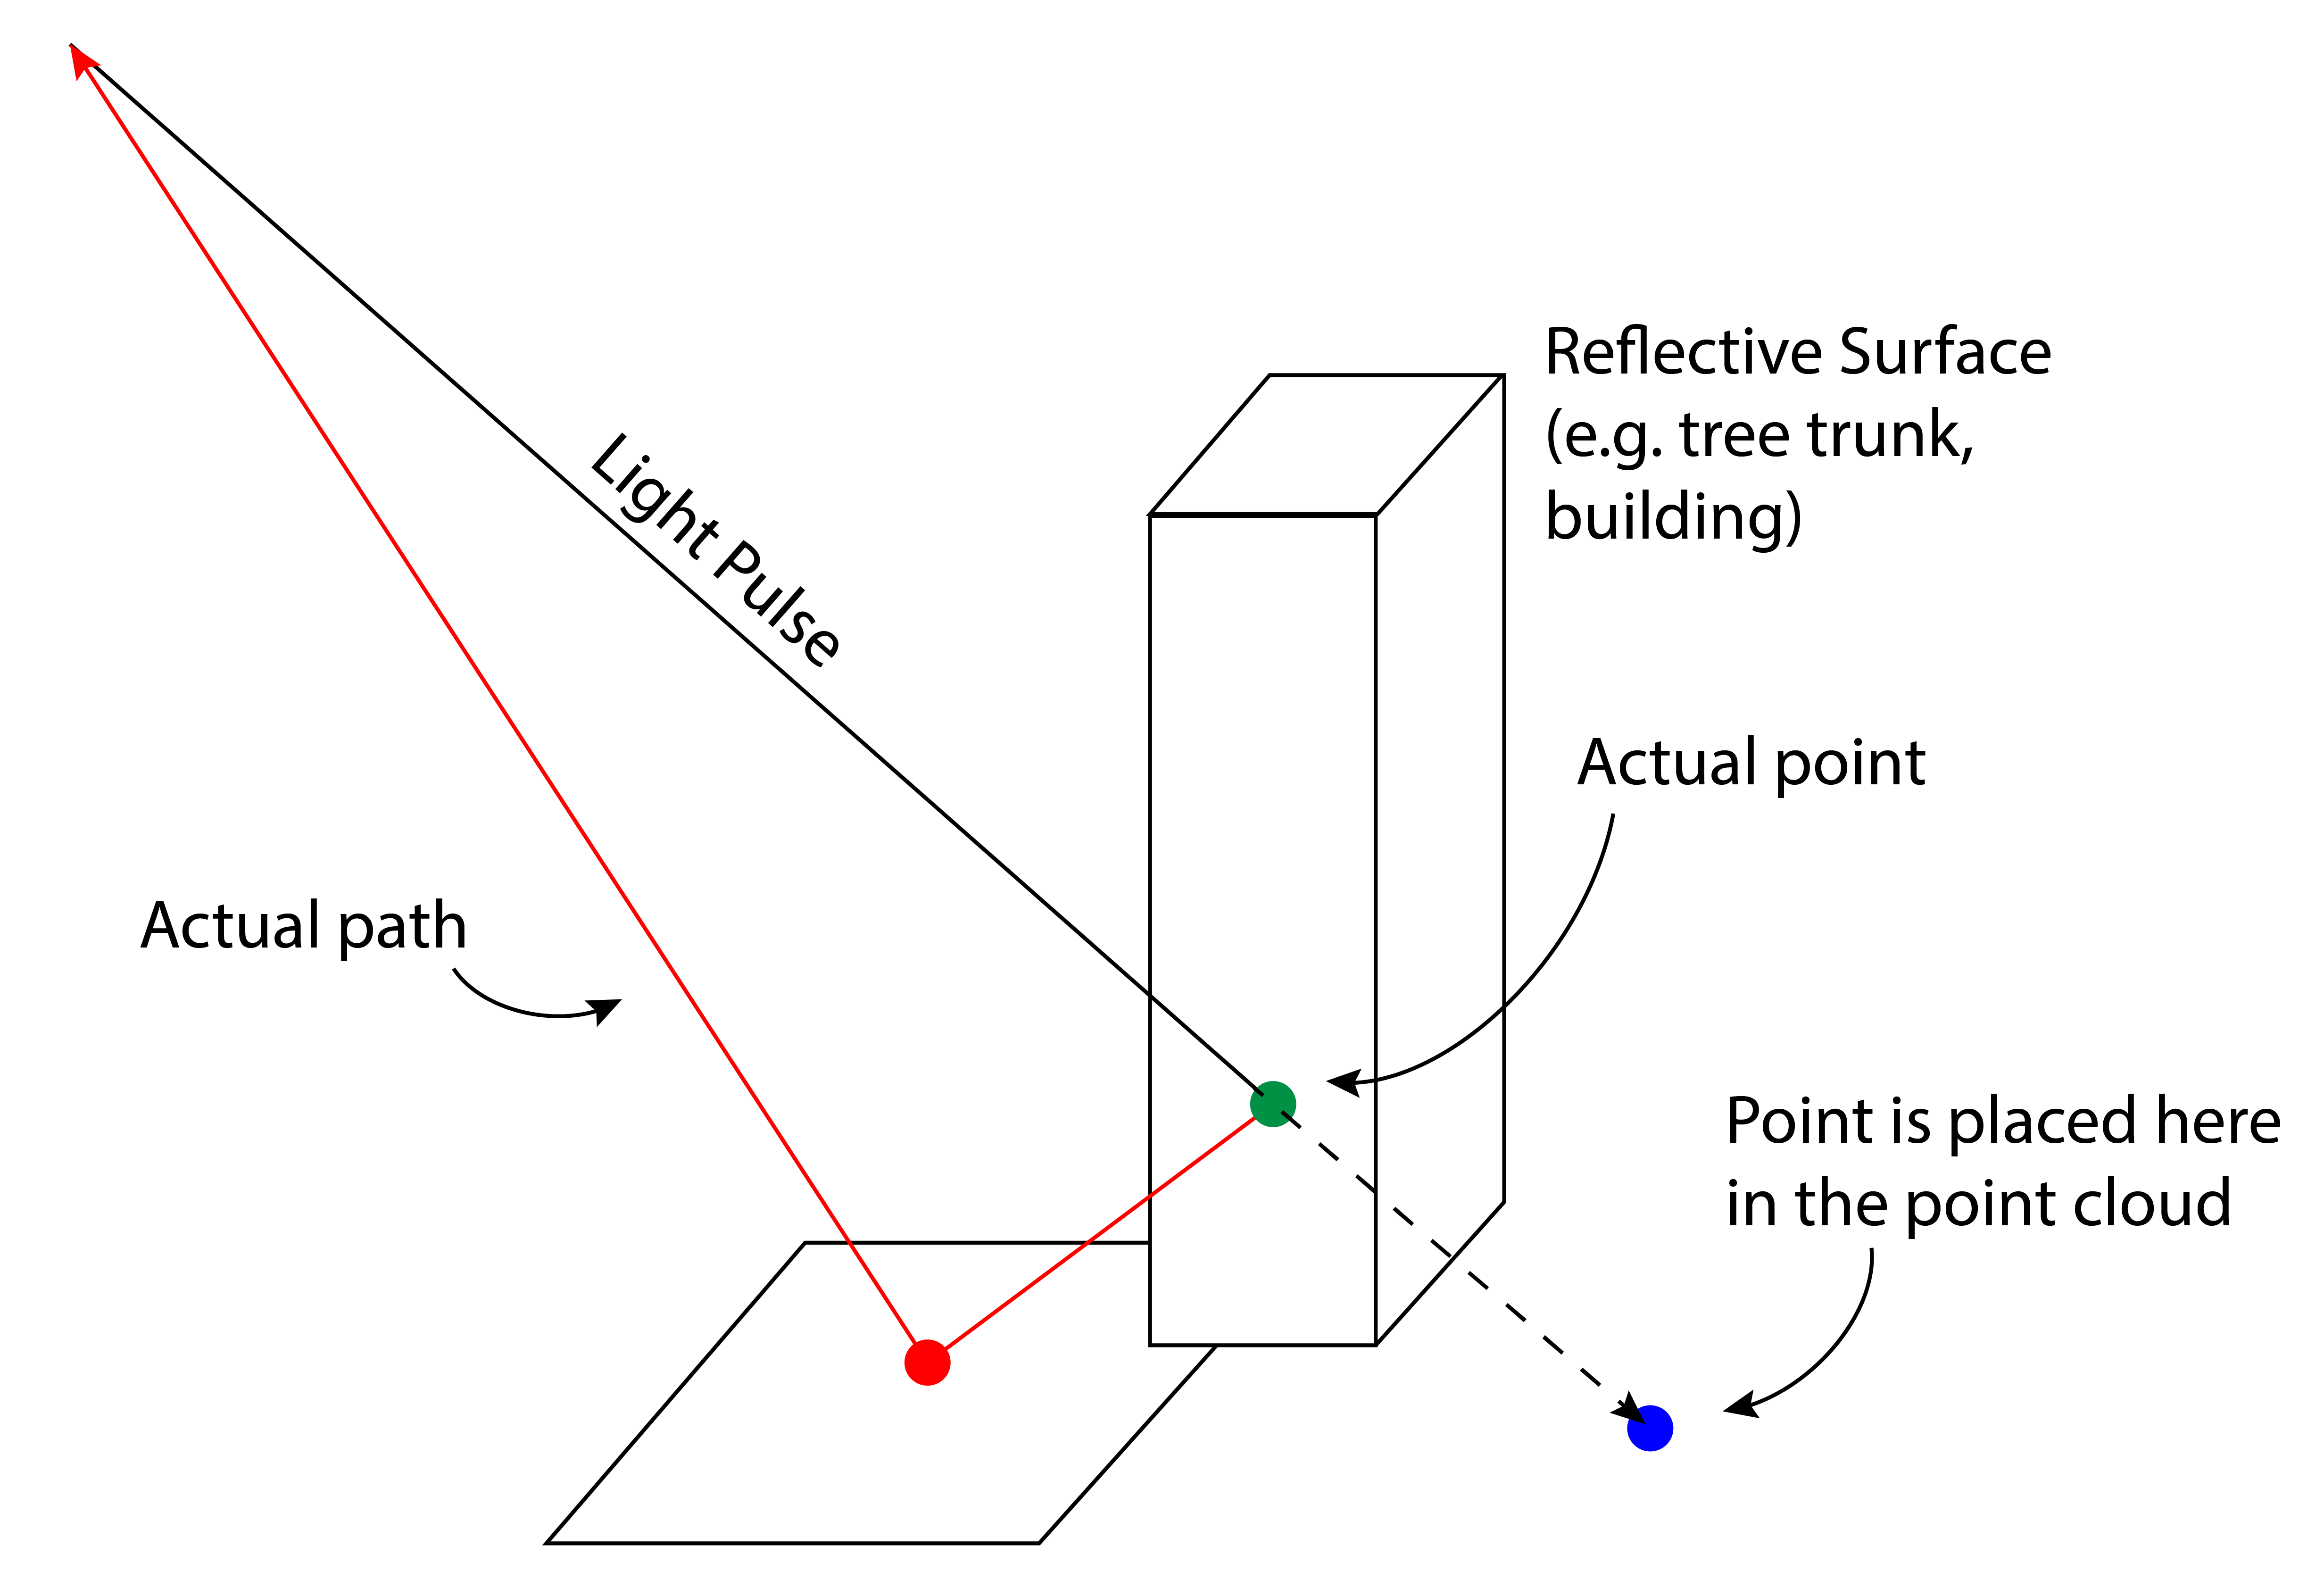 Example of multipath errors that can occur. The green dot is where our point is actually located in space, while the blue point shows where the point is placed in the point cloud. The red line shows the path of the reflected pulse. Du Toit, CC-BY-SA-4.0.